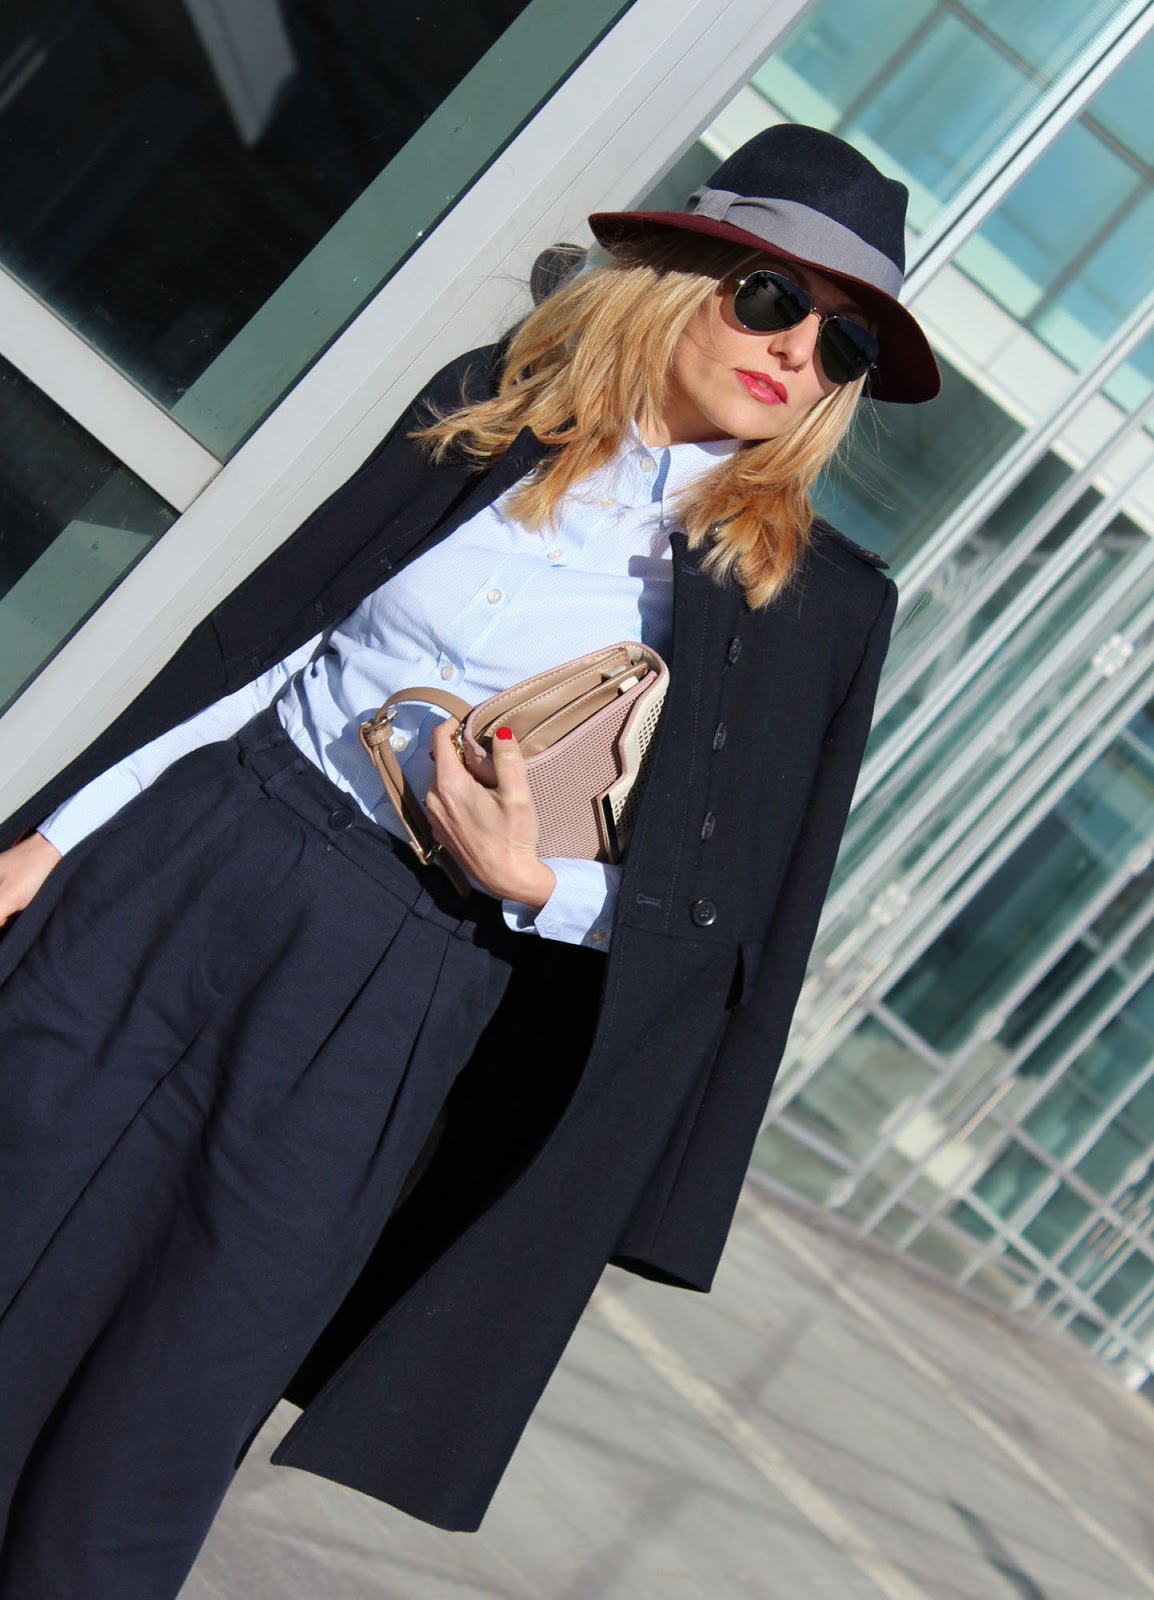 Eniwhere Fashion - Culottes and hat